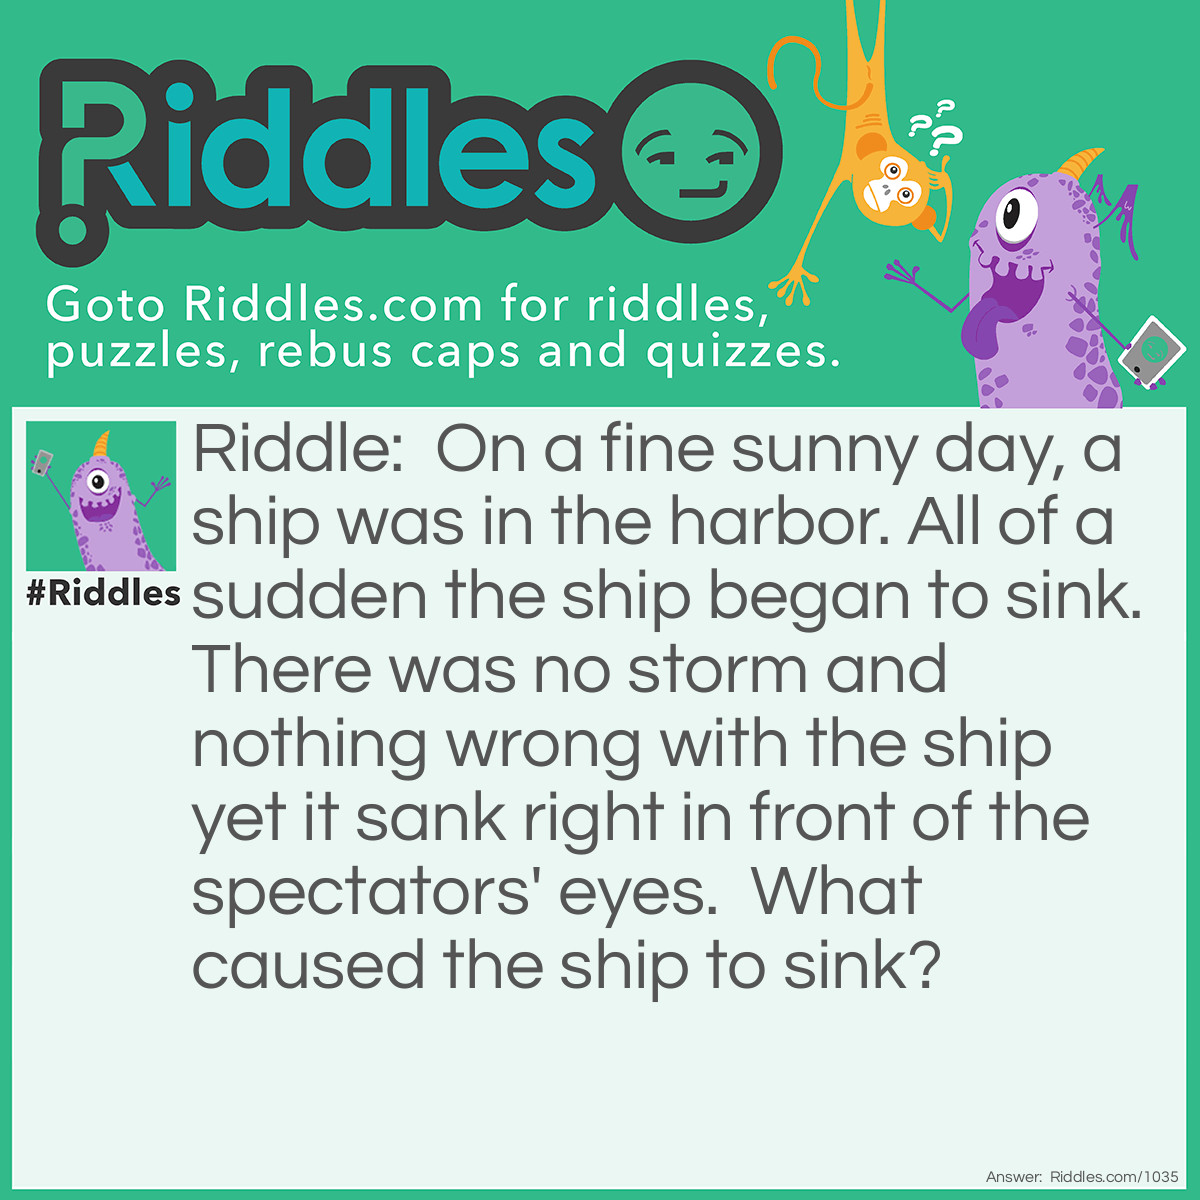 Riddle: On a fine sunny day, a ship was in the harbor. All of a sudden the ship began to sink. There was no storm and nothing wrong with the ship yet it sank right in front of the spectators' eyes.  What caused the ship to sink? Answer: The "Submarine" Captain ordered the crew to dive.